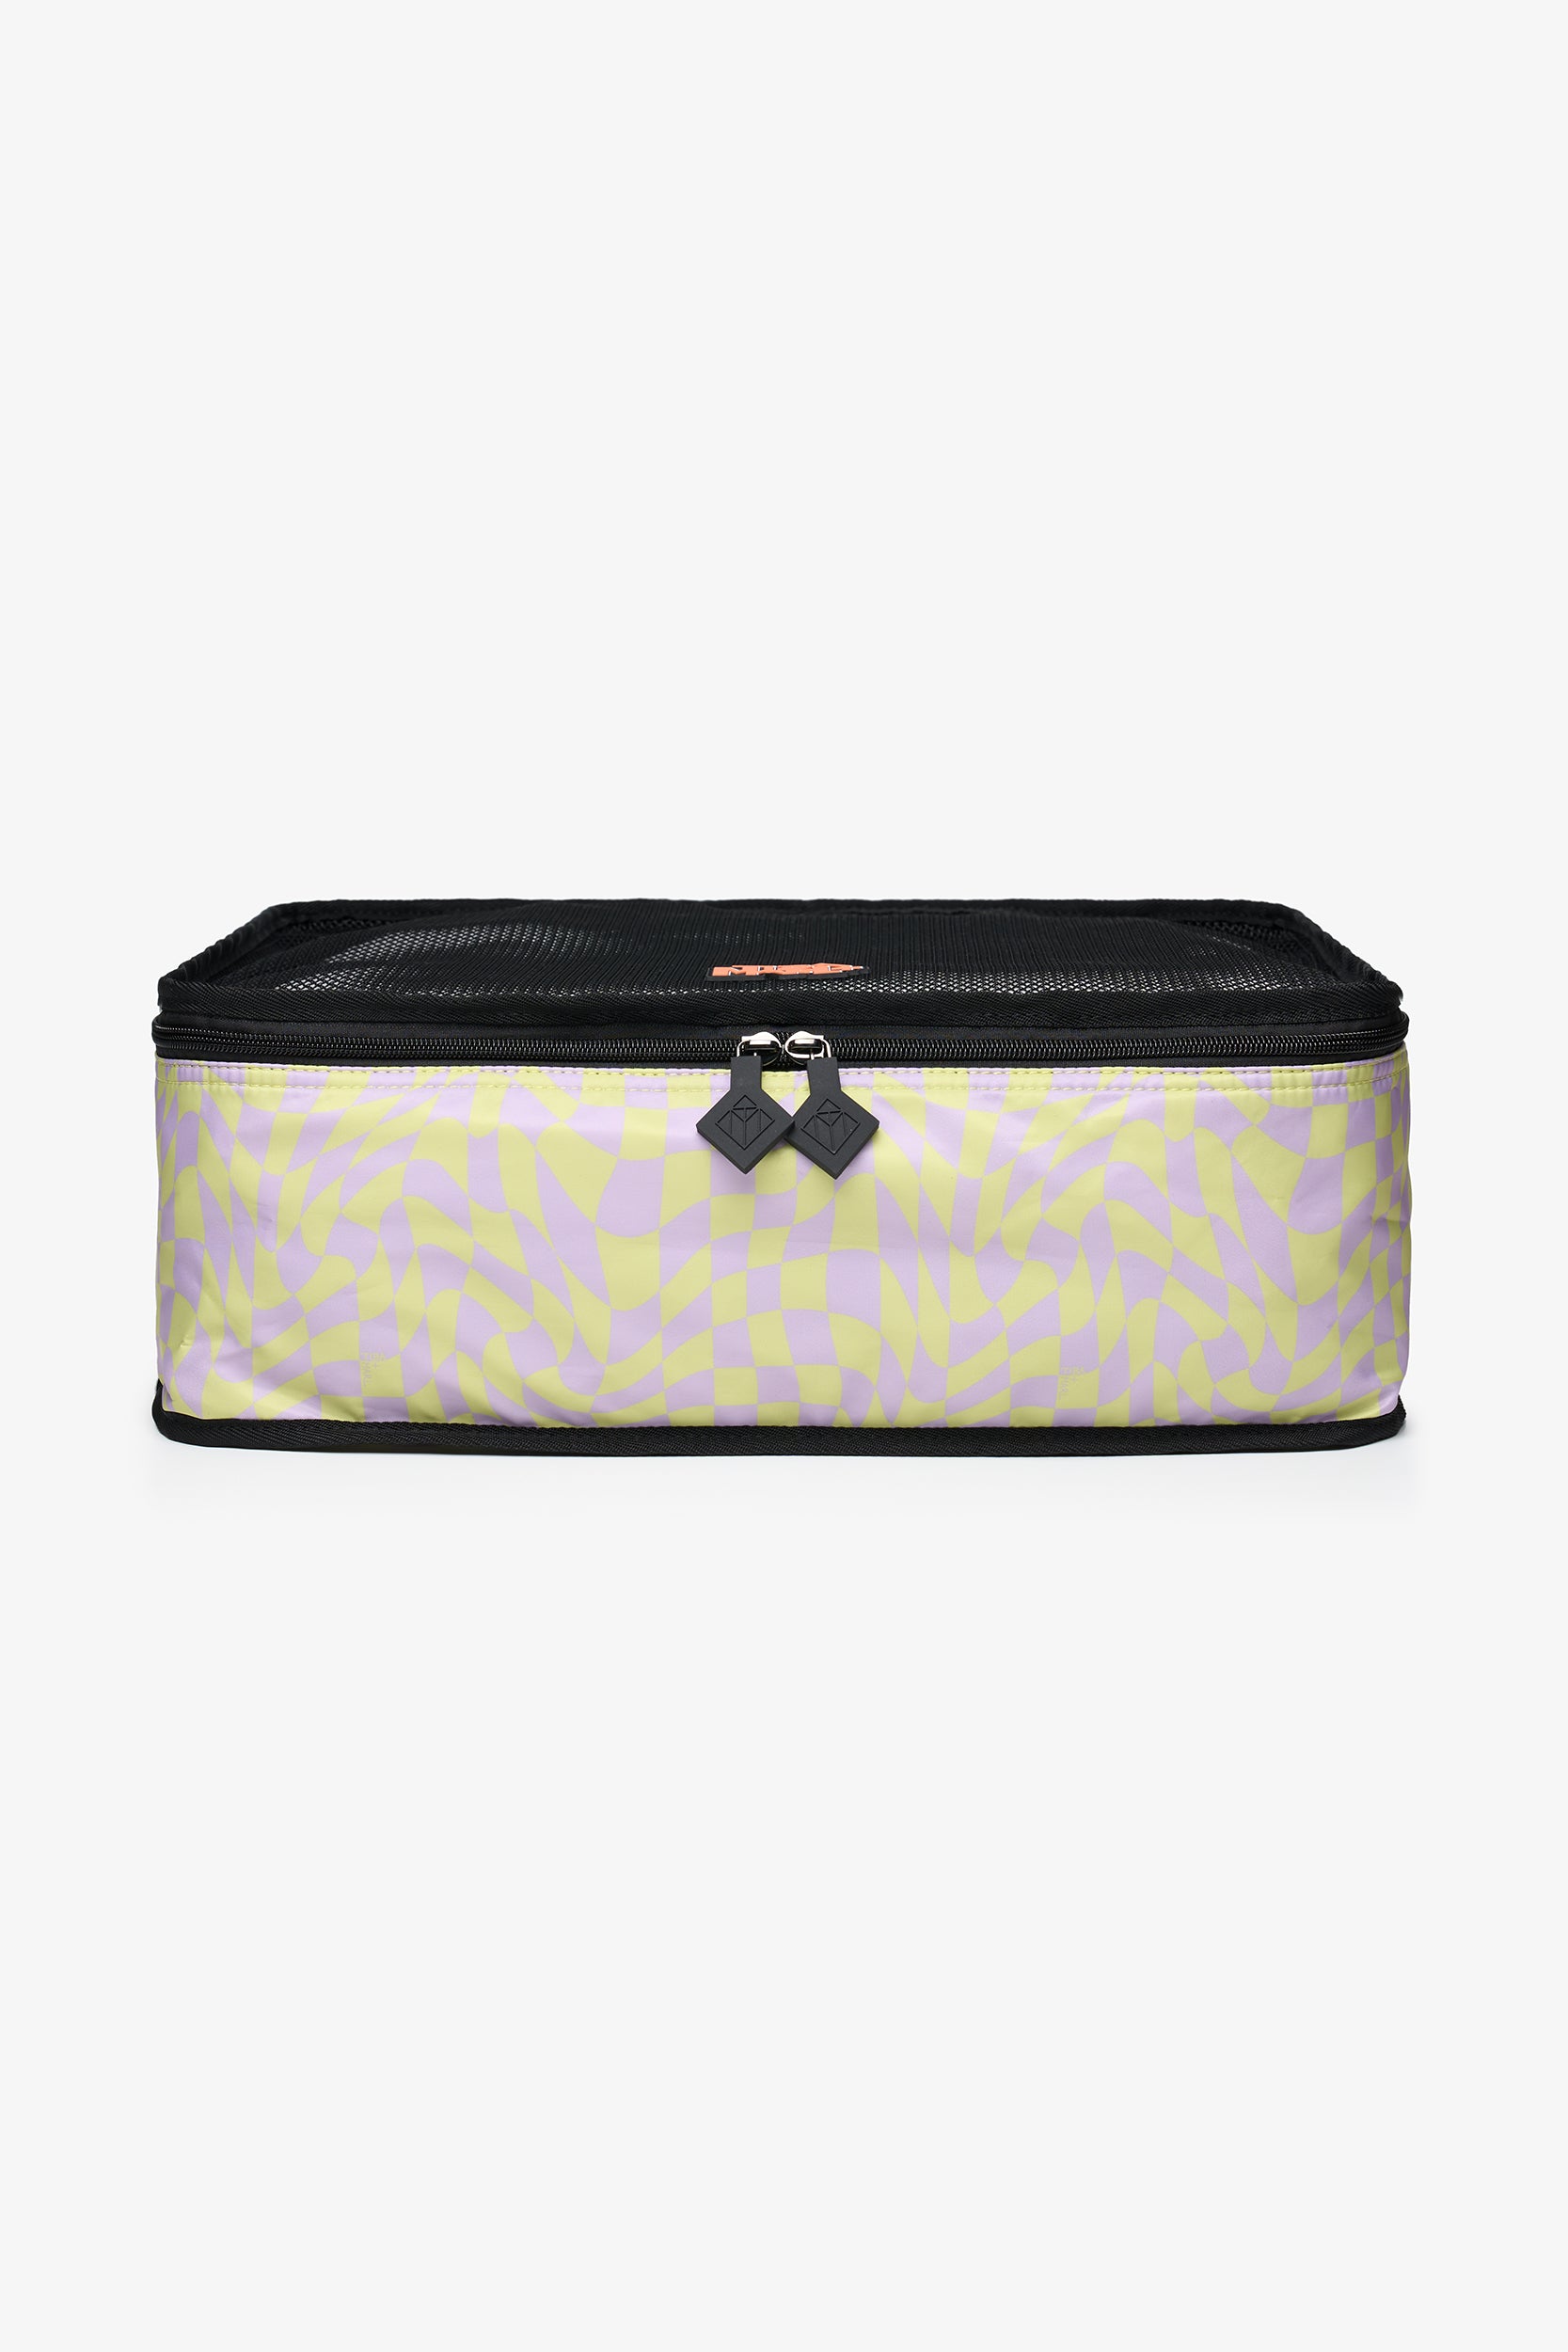 T+M Packing Cubes Set Mixed Wavy Checkerboard Print